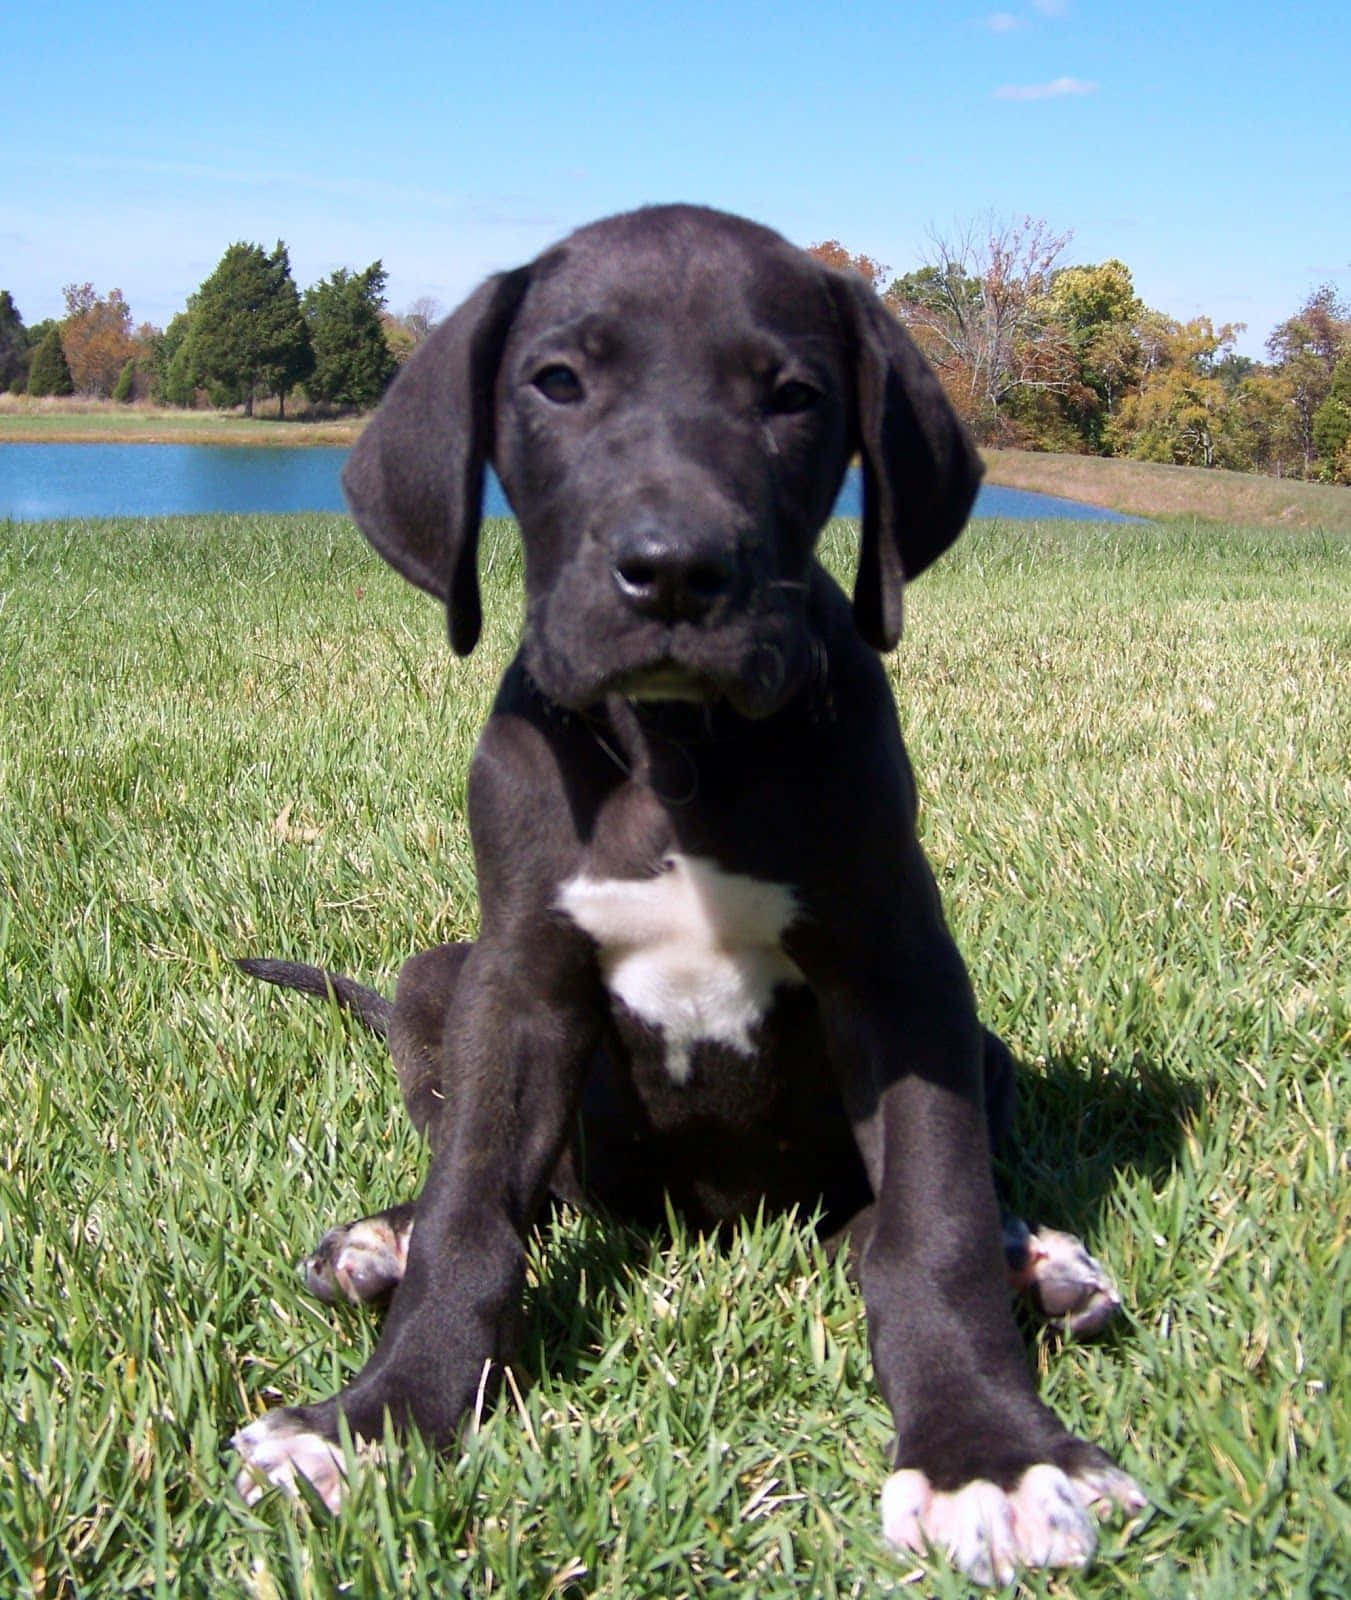 A Black Puppy Sitting On The Grass